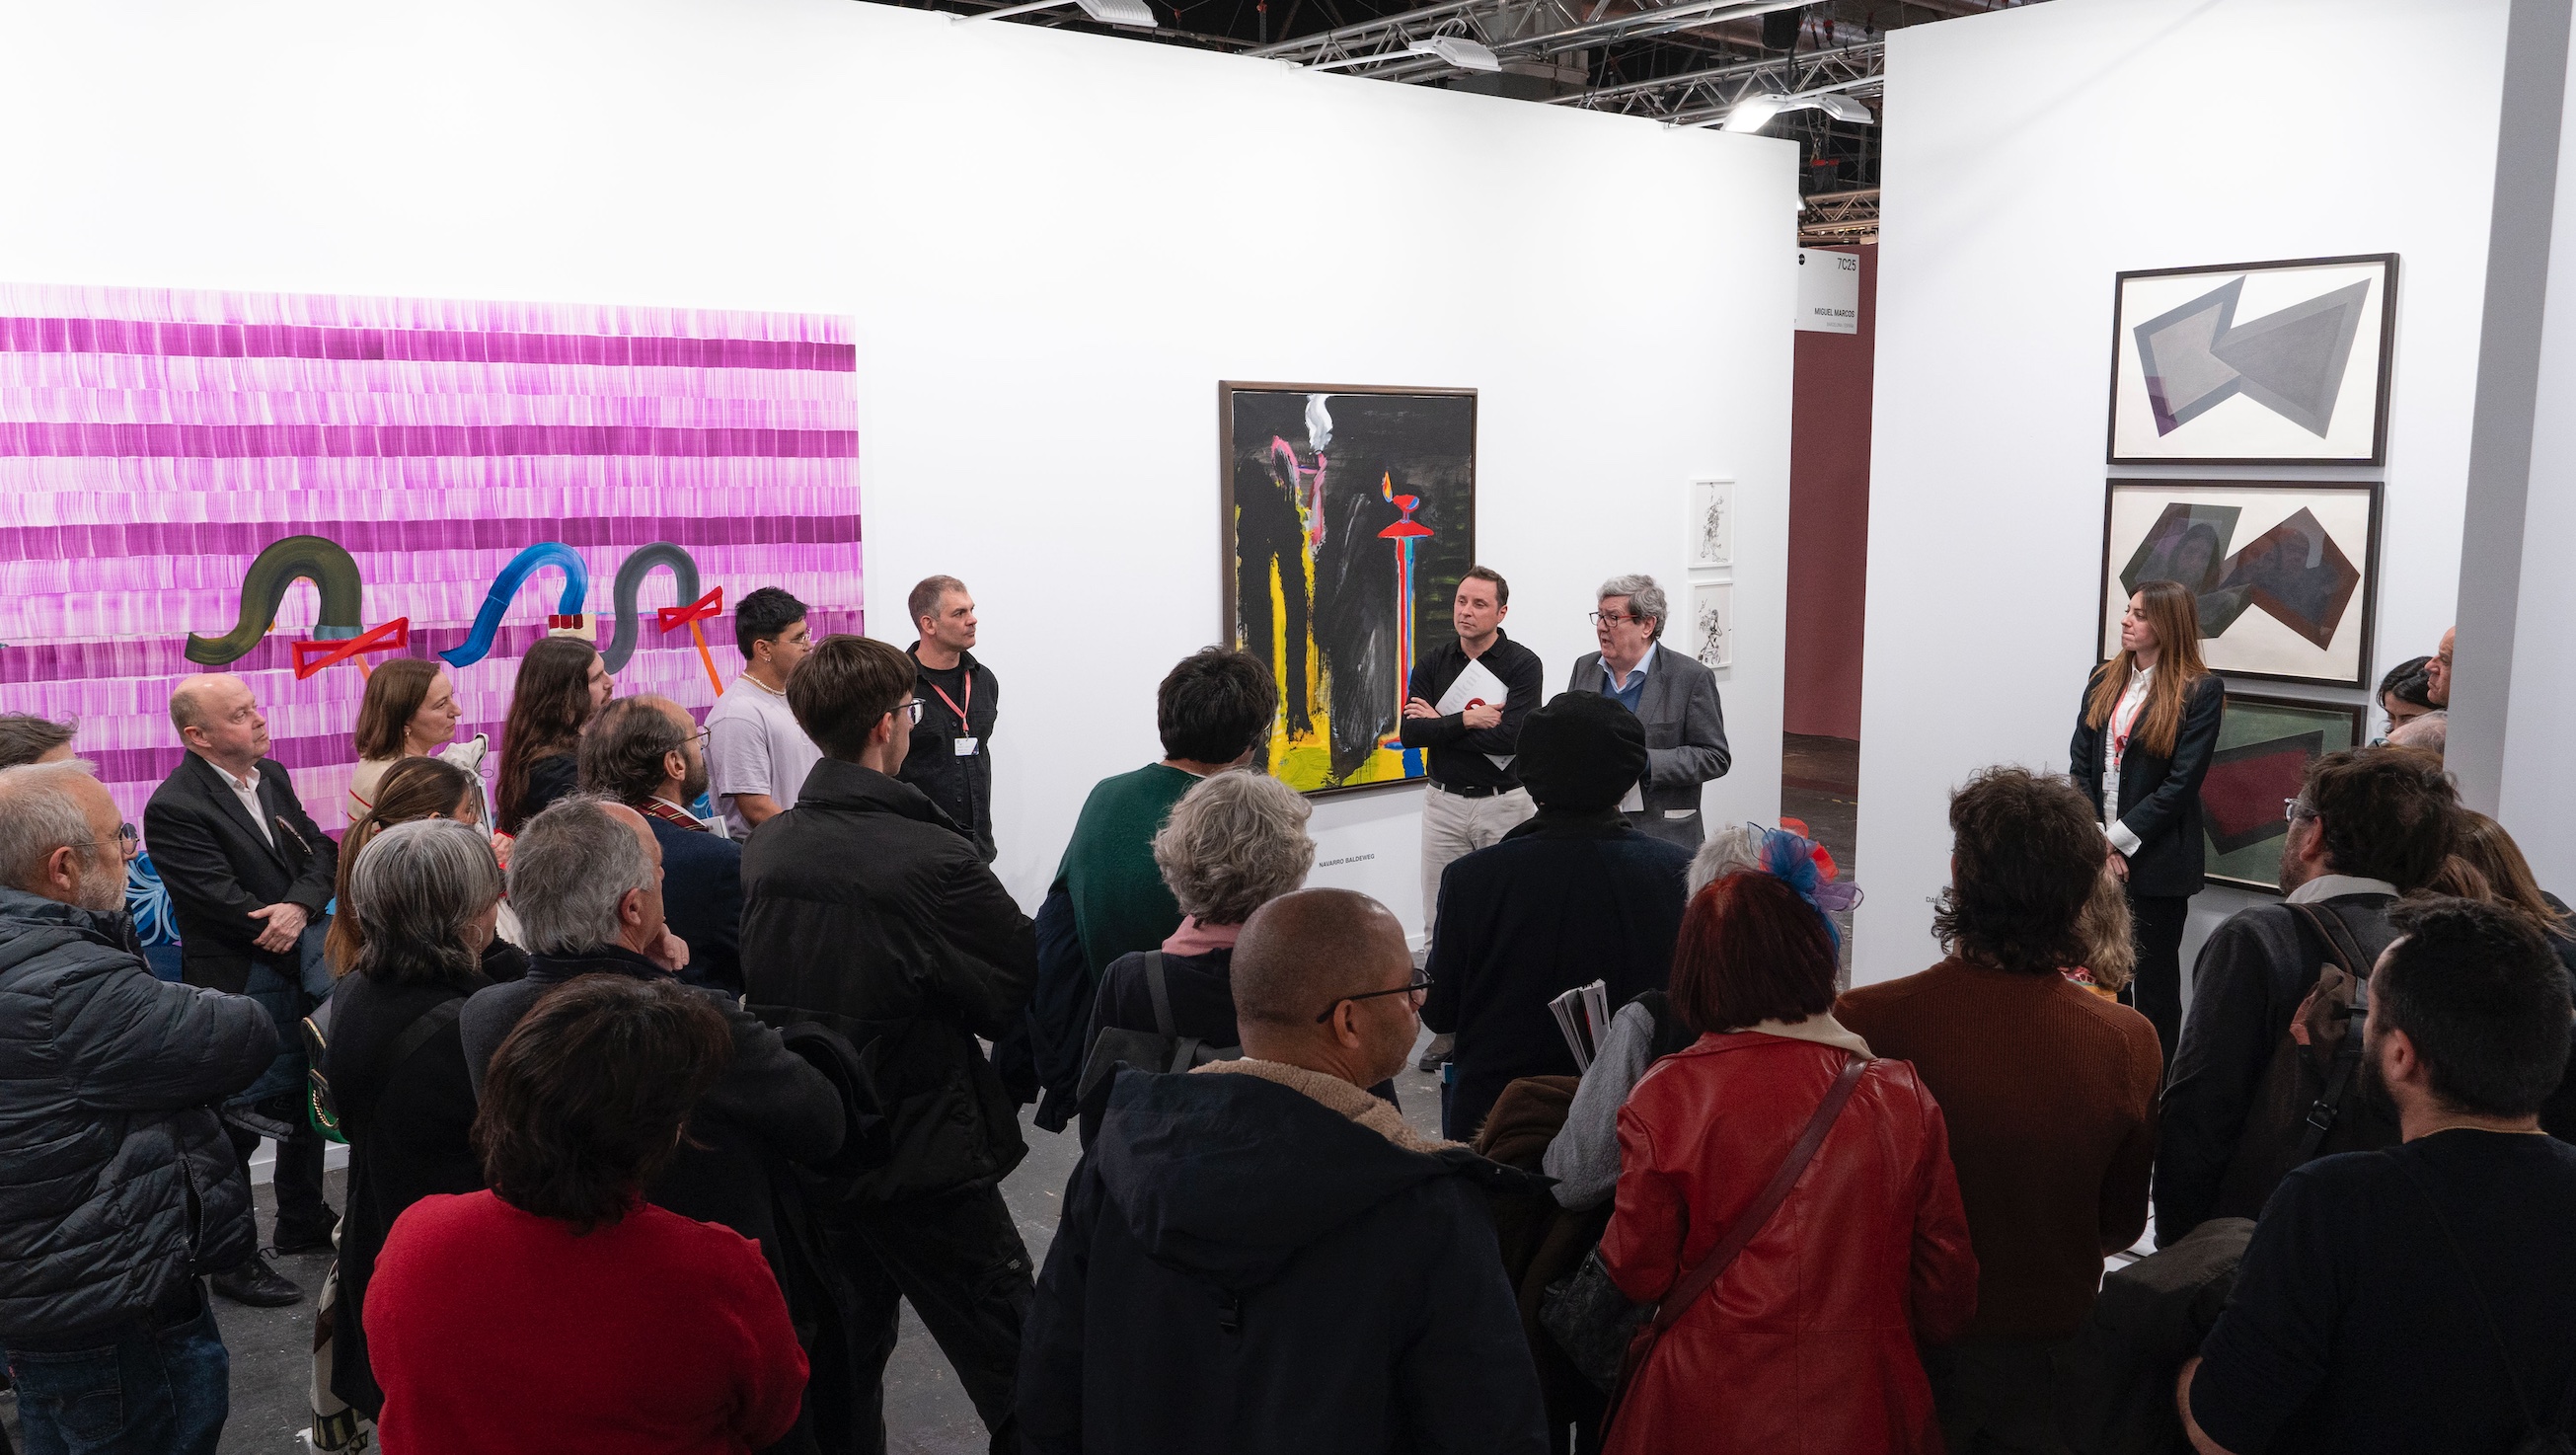 Bonart cultural presents number 199 and the monograph on Joan Brossa at the Arco fair in Madrid